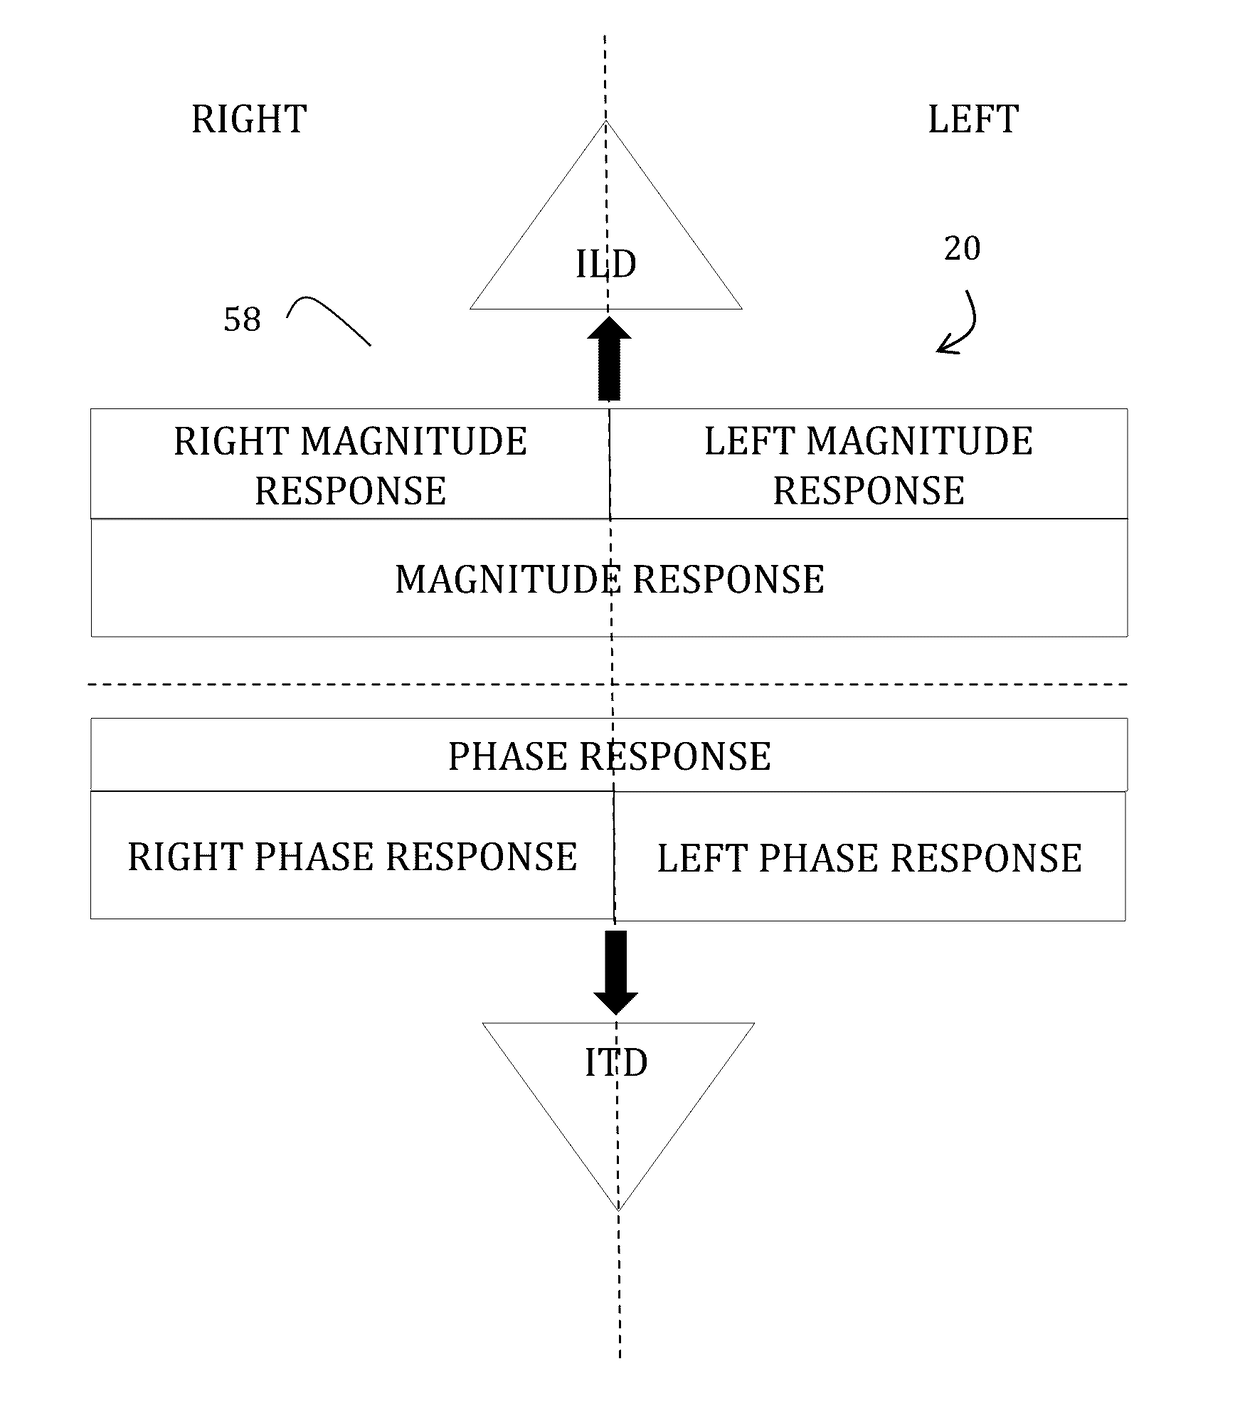 Efficient personalization of head-related transfer functions for improved virtual spatial audio